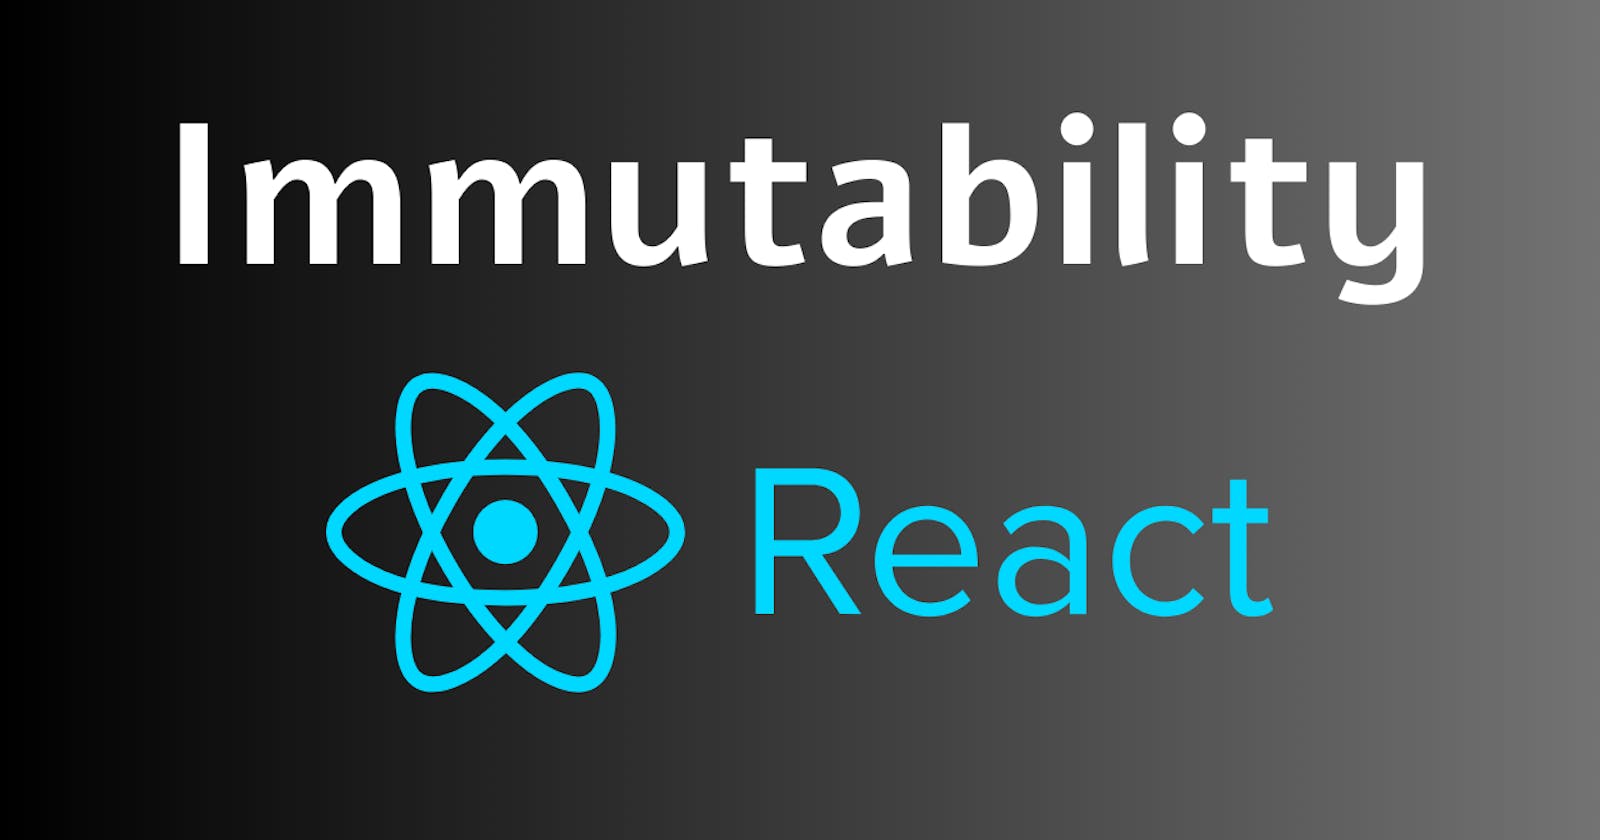 Why we should not mutate state in react